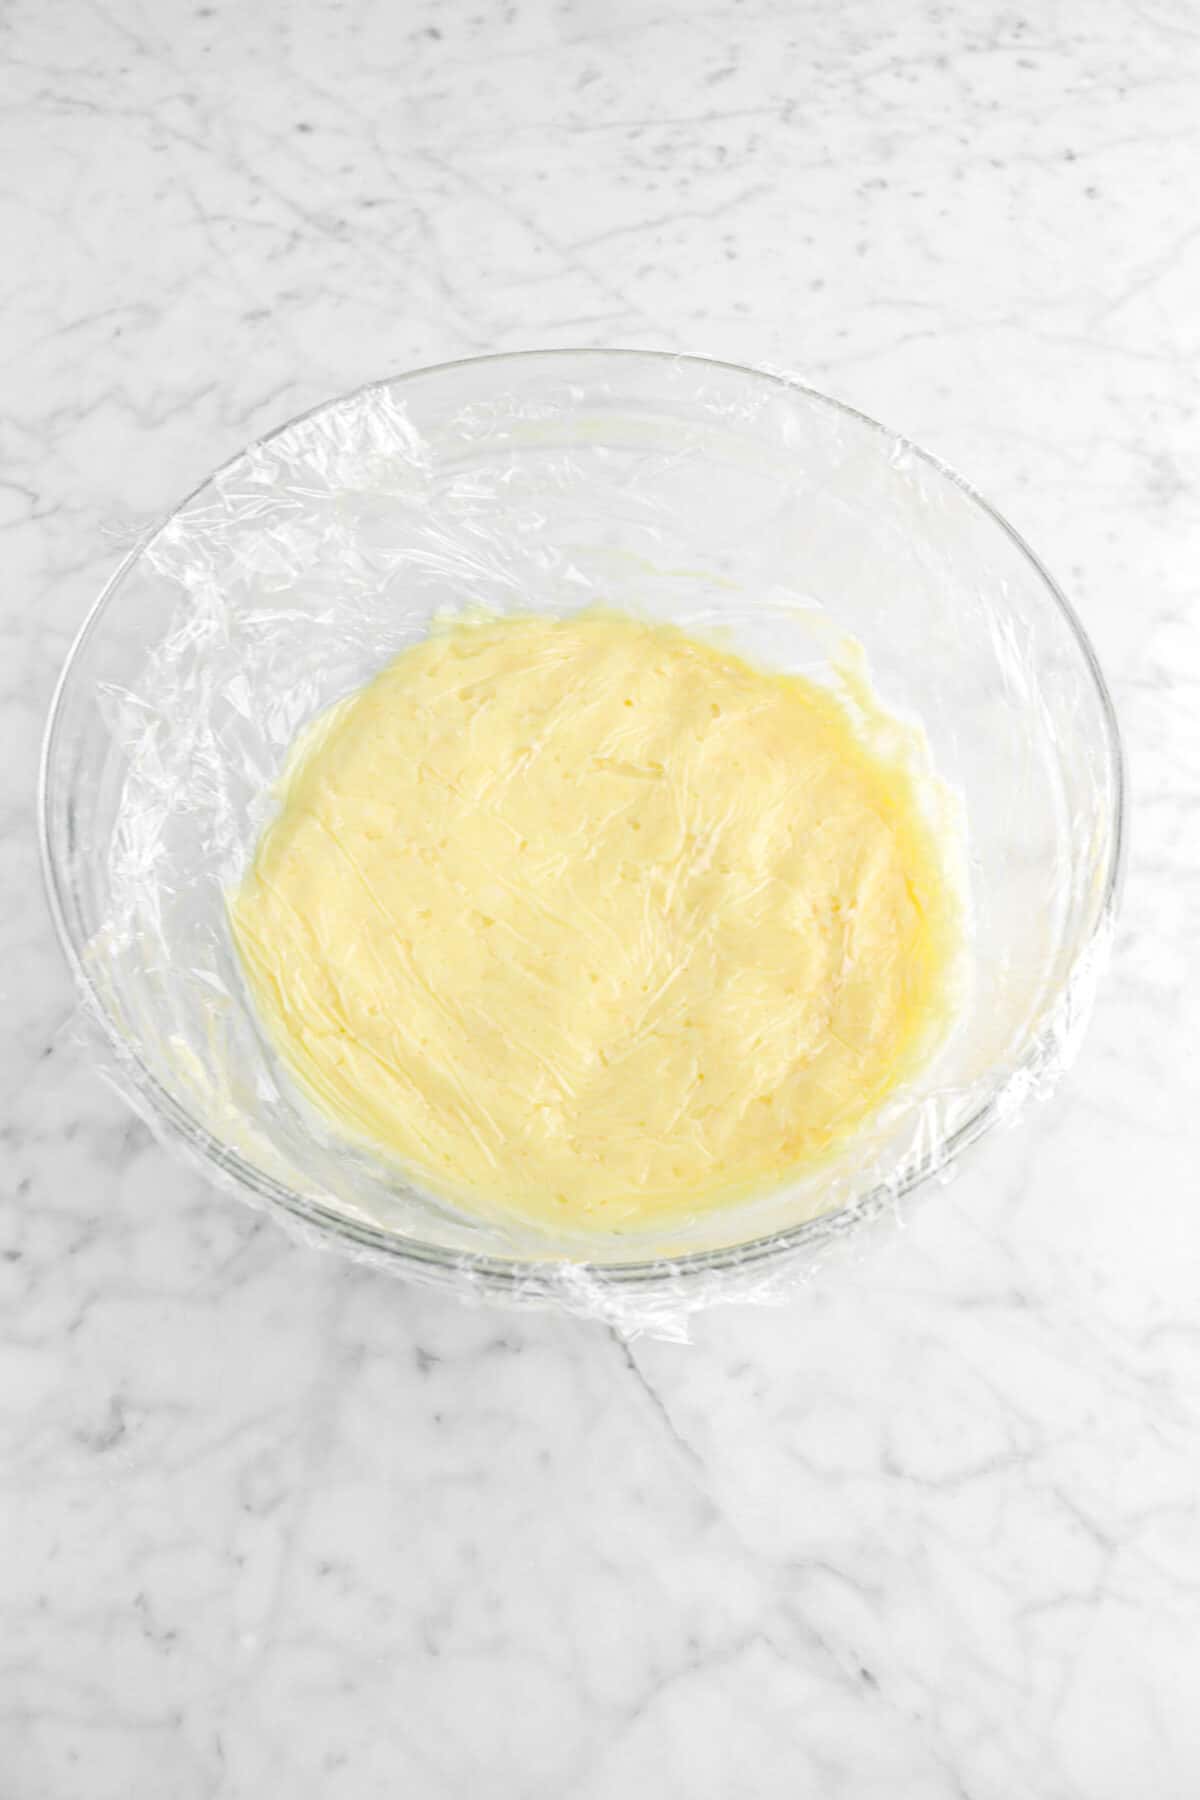 plastic wrap covering pastry cream in a glass bowl